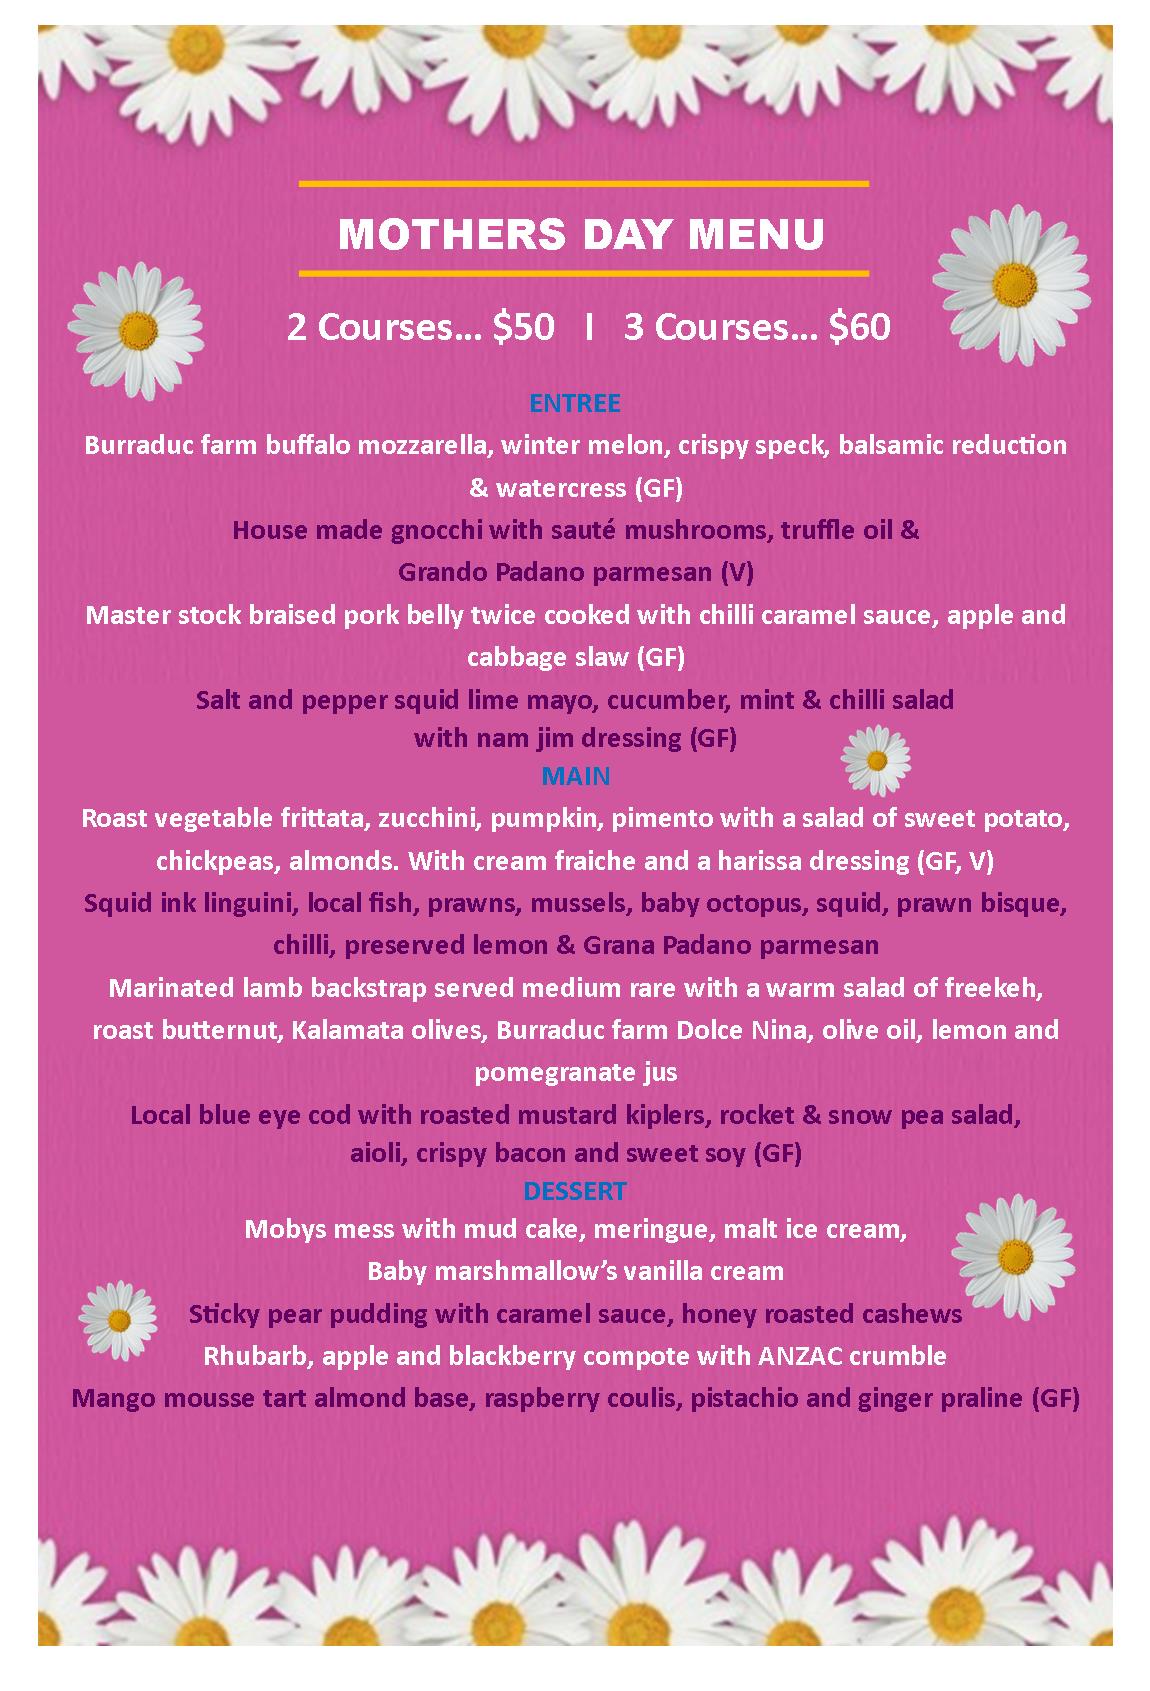 2017 Mothers Day Menu